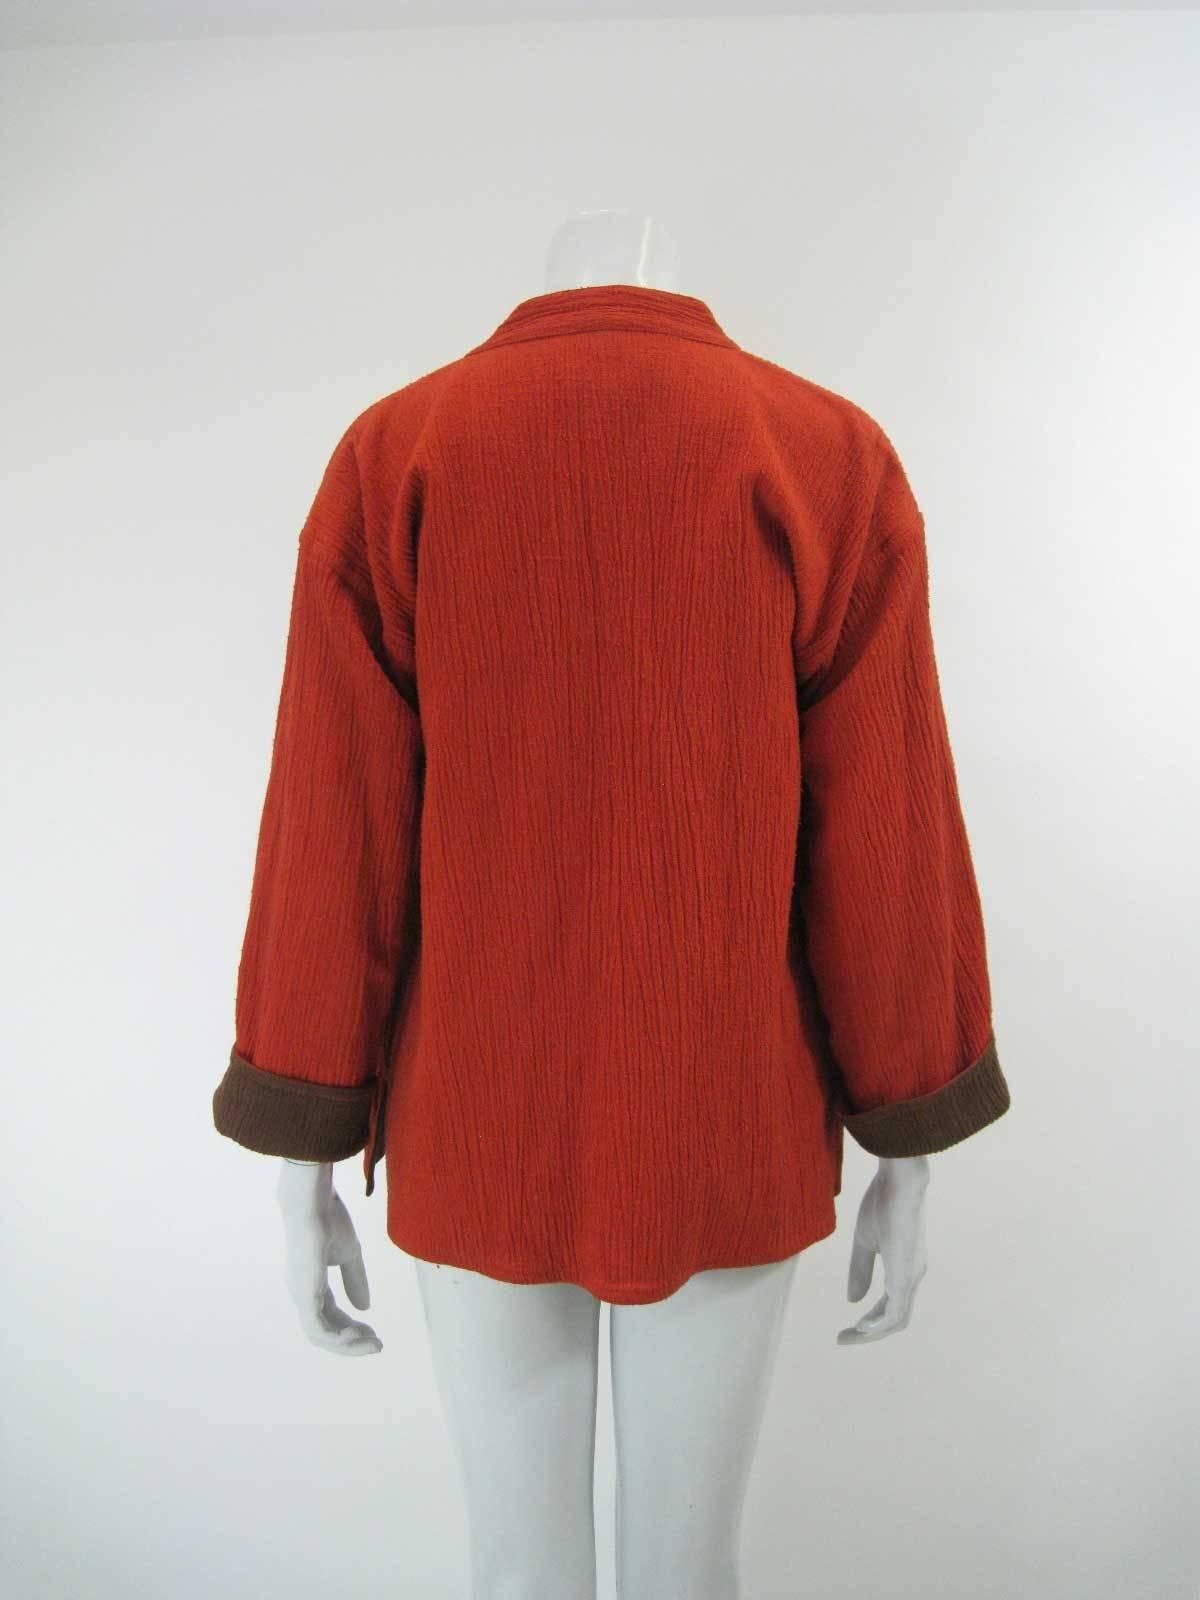 Vintage Issey Miyake Textured Orange & Brown Open Jacket In Good Condition For Sale In Oakland, CA